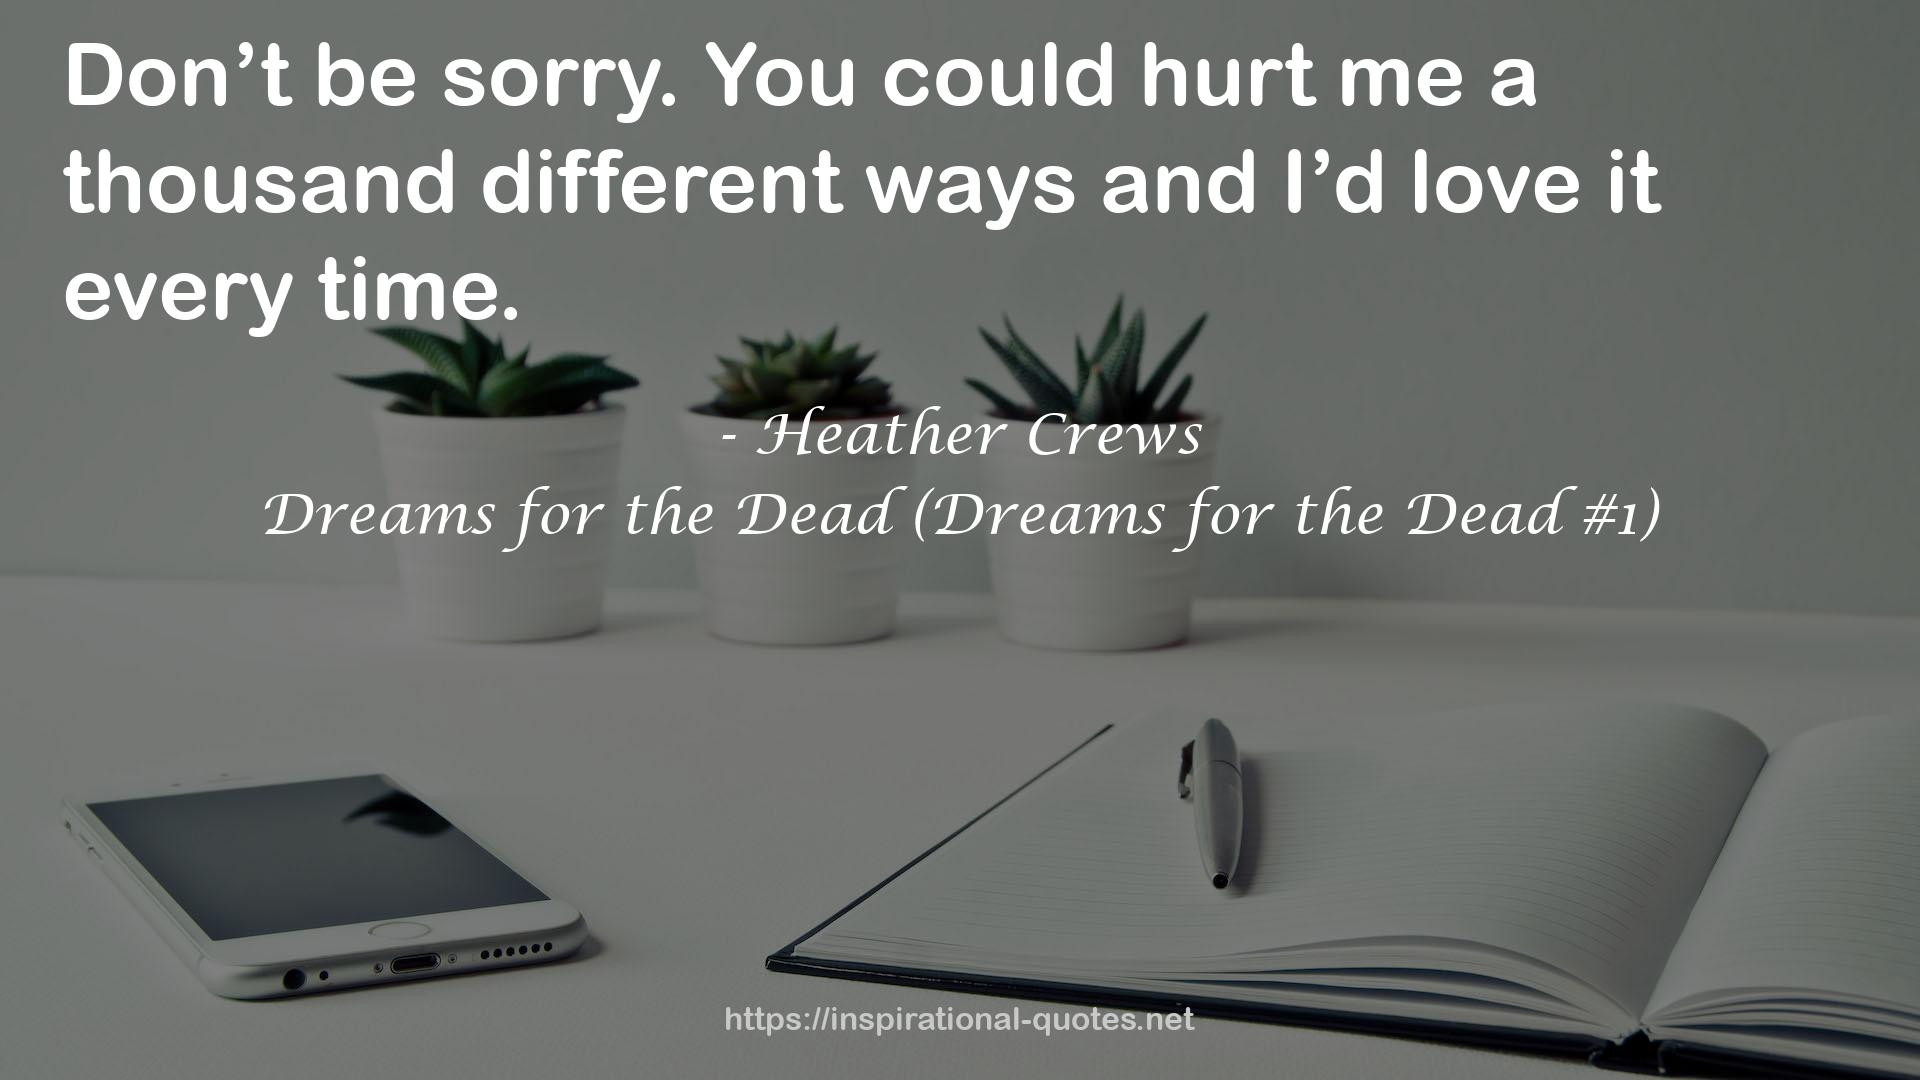 Dreams for the Dead (Dreams for the Dead #1) QUOTES